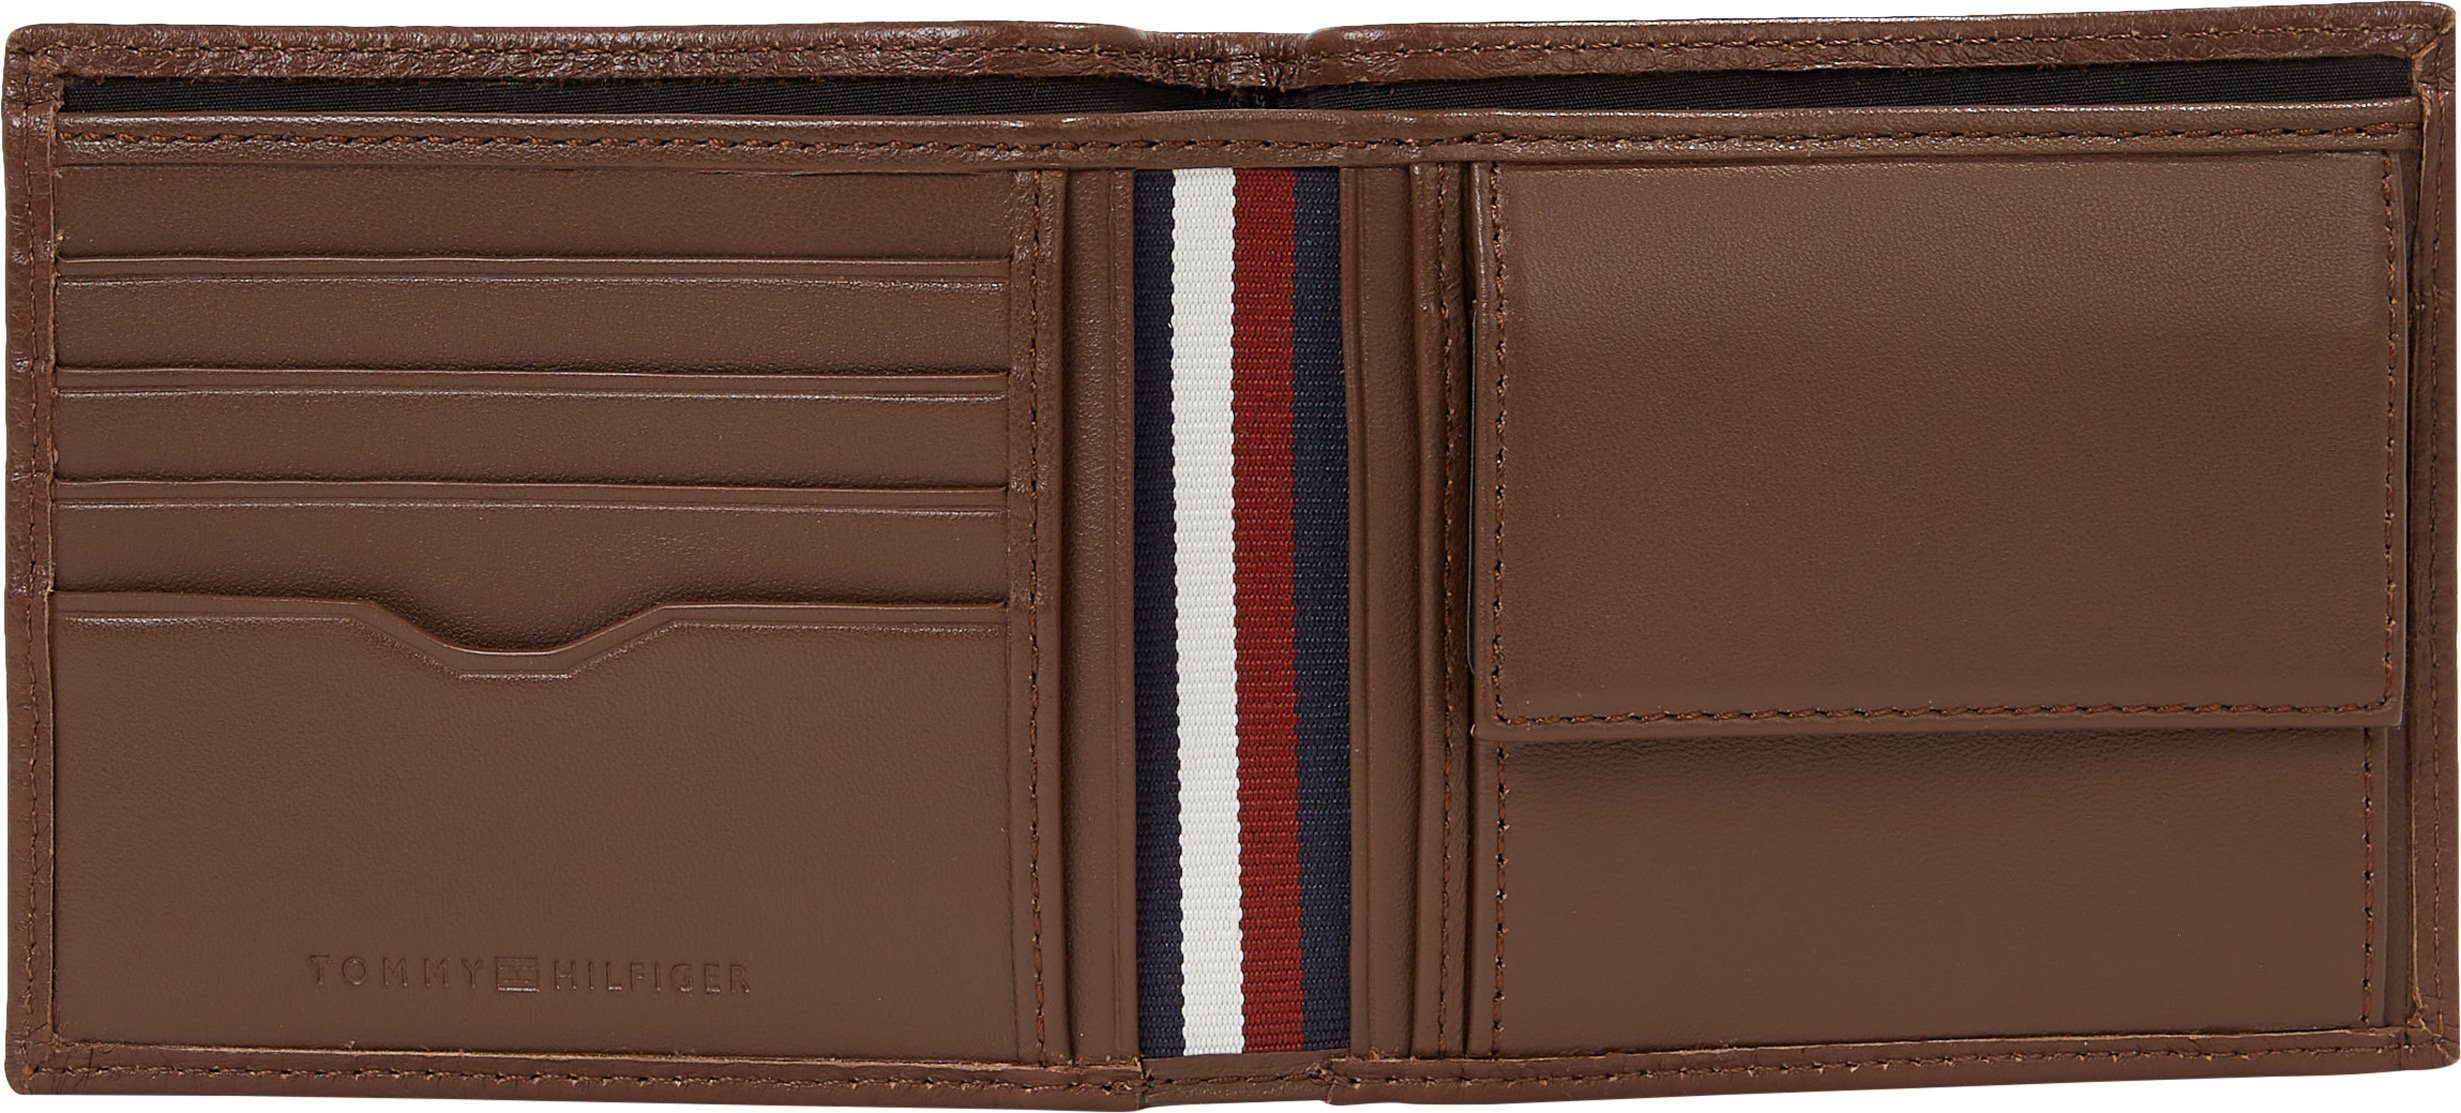 Tommy Hilfiger Portemonnee TH CENTRAL CC AND COIN